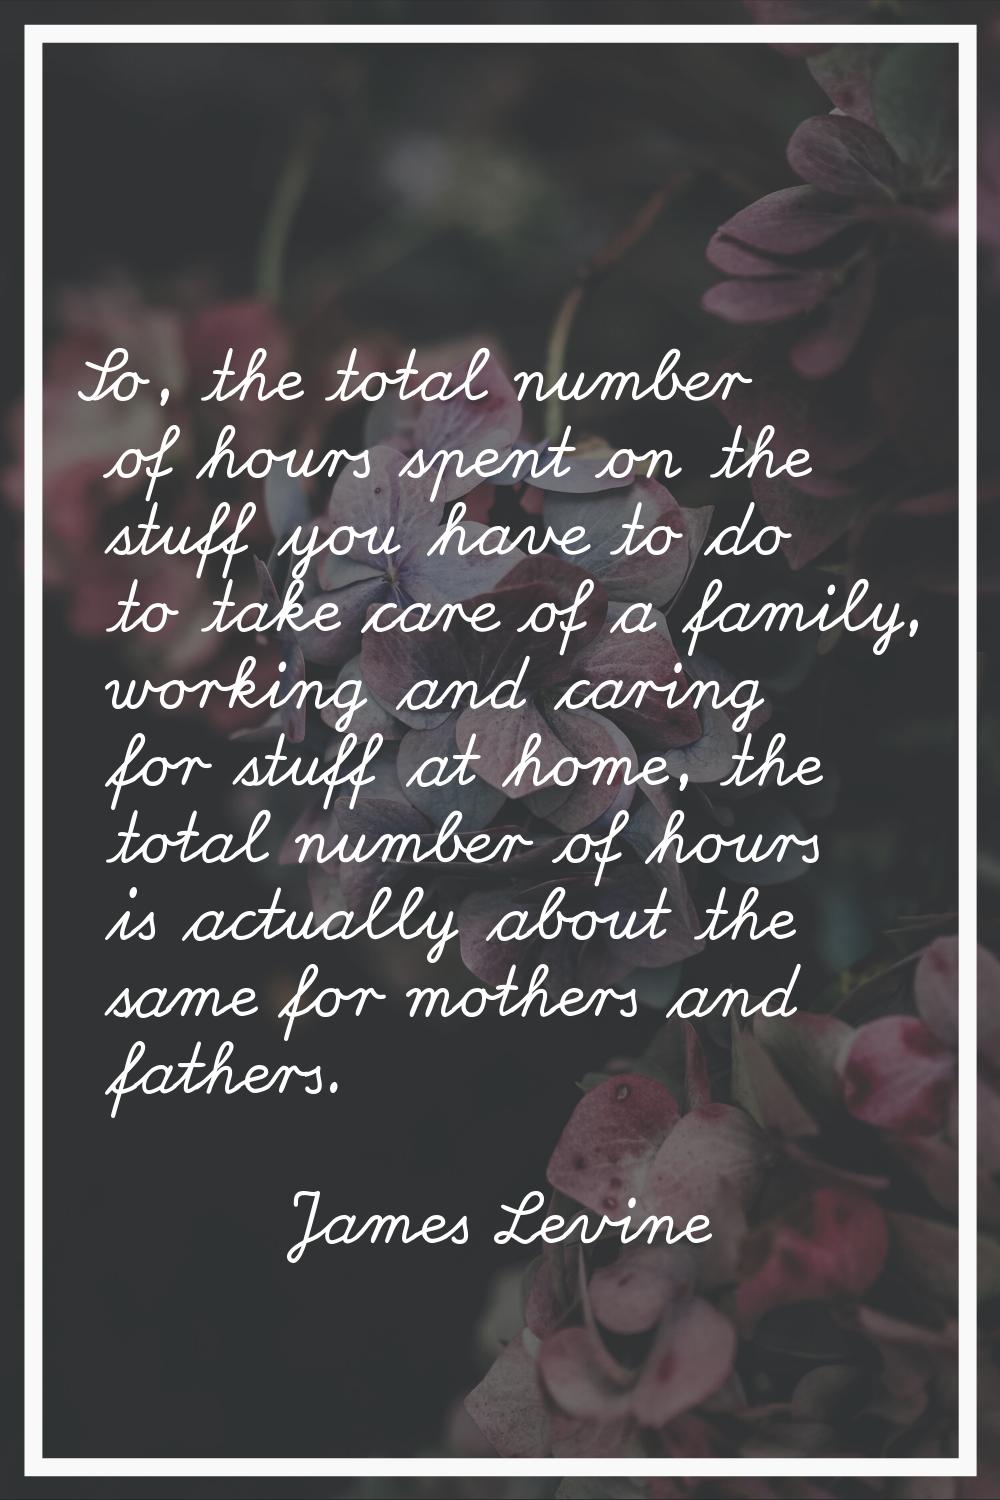 So, the total number of hours spent on the stuff you have to do to take care of a family, working a